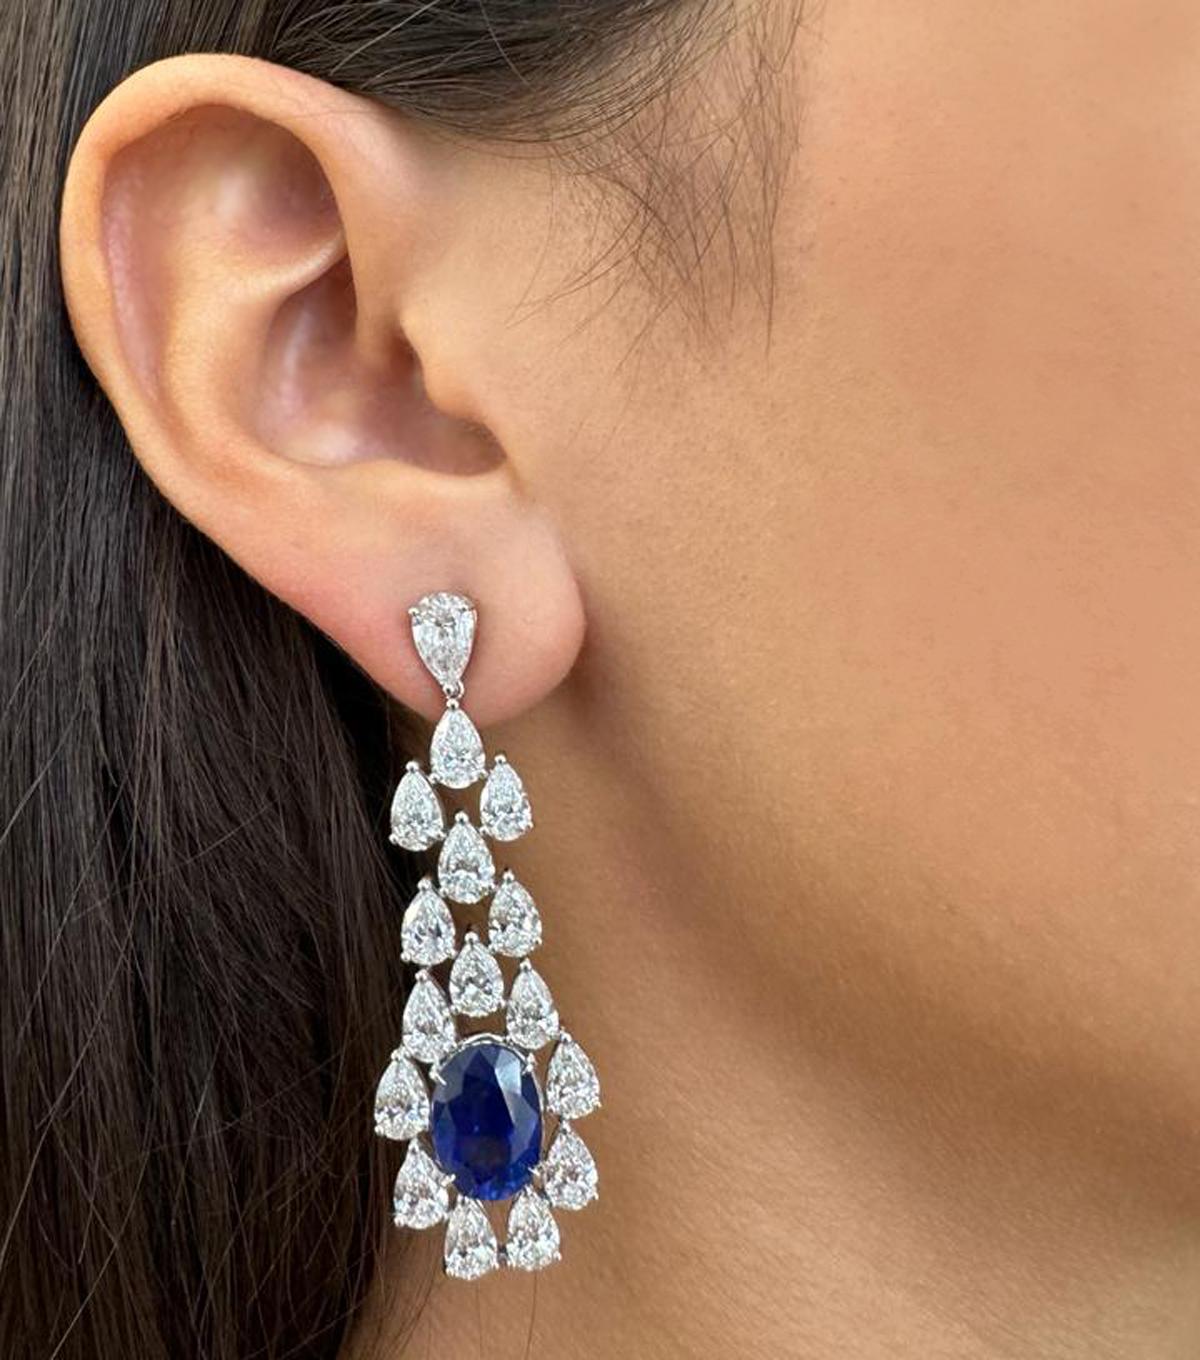 From the house of Vivid Diamonds, These resplendent earrings have been meticulously fashioned from 18k white gold and showcase a pair of regal, GIA-certified Ceylon sapphires, radiating a deep royal blue hue and weighing an impressive 10.93 carats